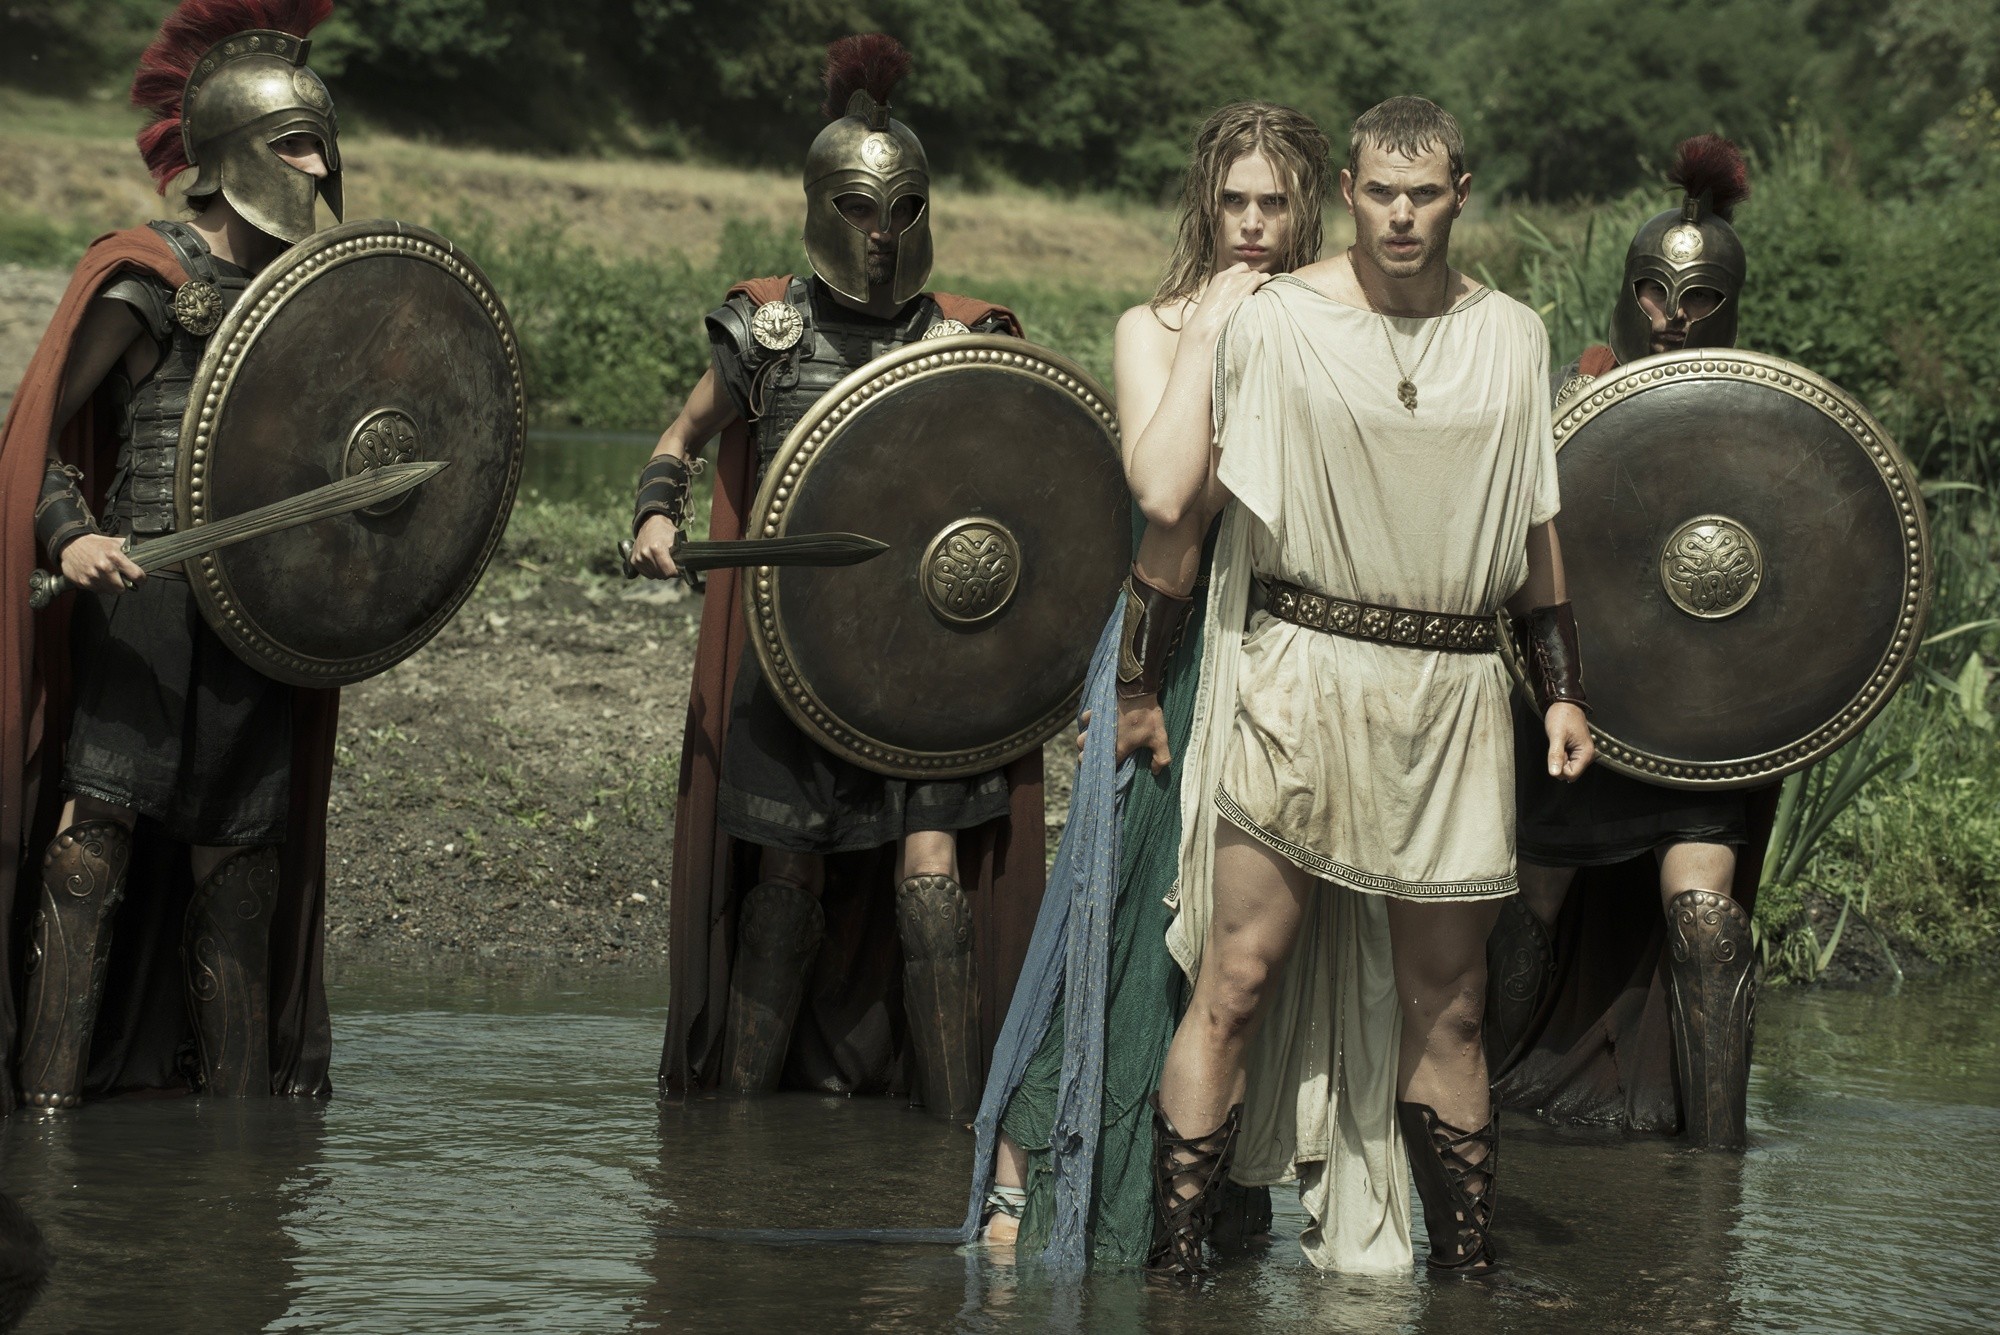 Gaia Weiss stars as Hebe and Kellan Lutz stars as Hercules in Summit Entertainment's The Legend of Hercules (2014)